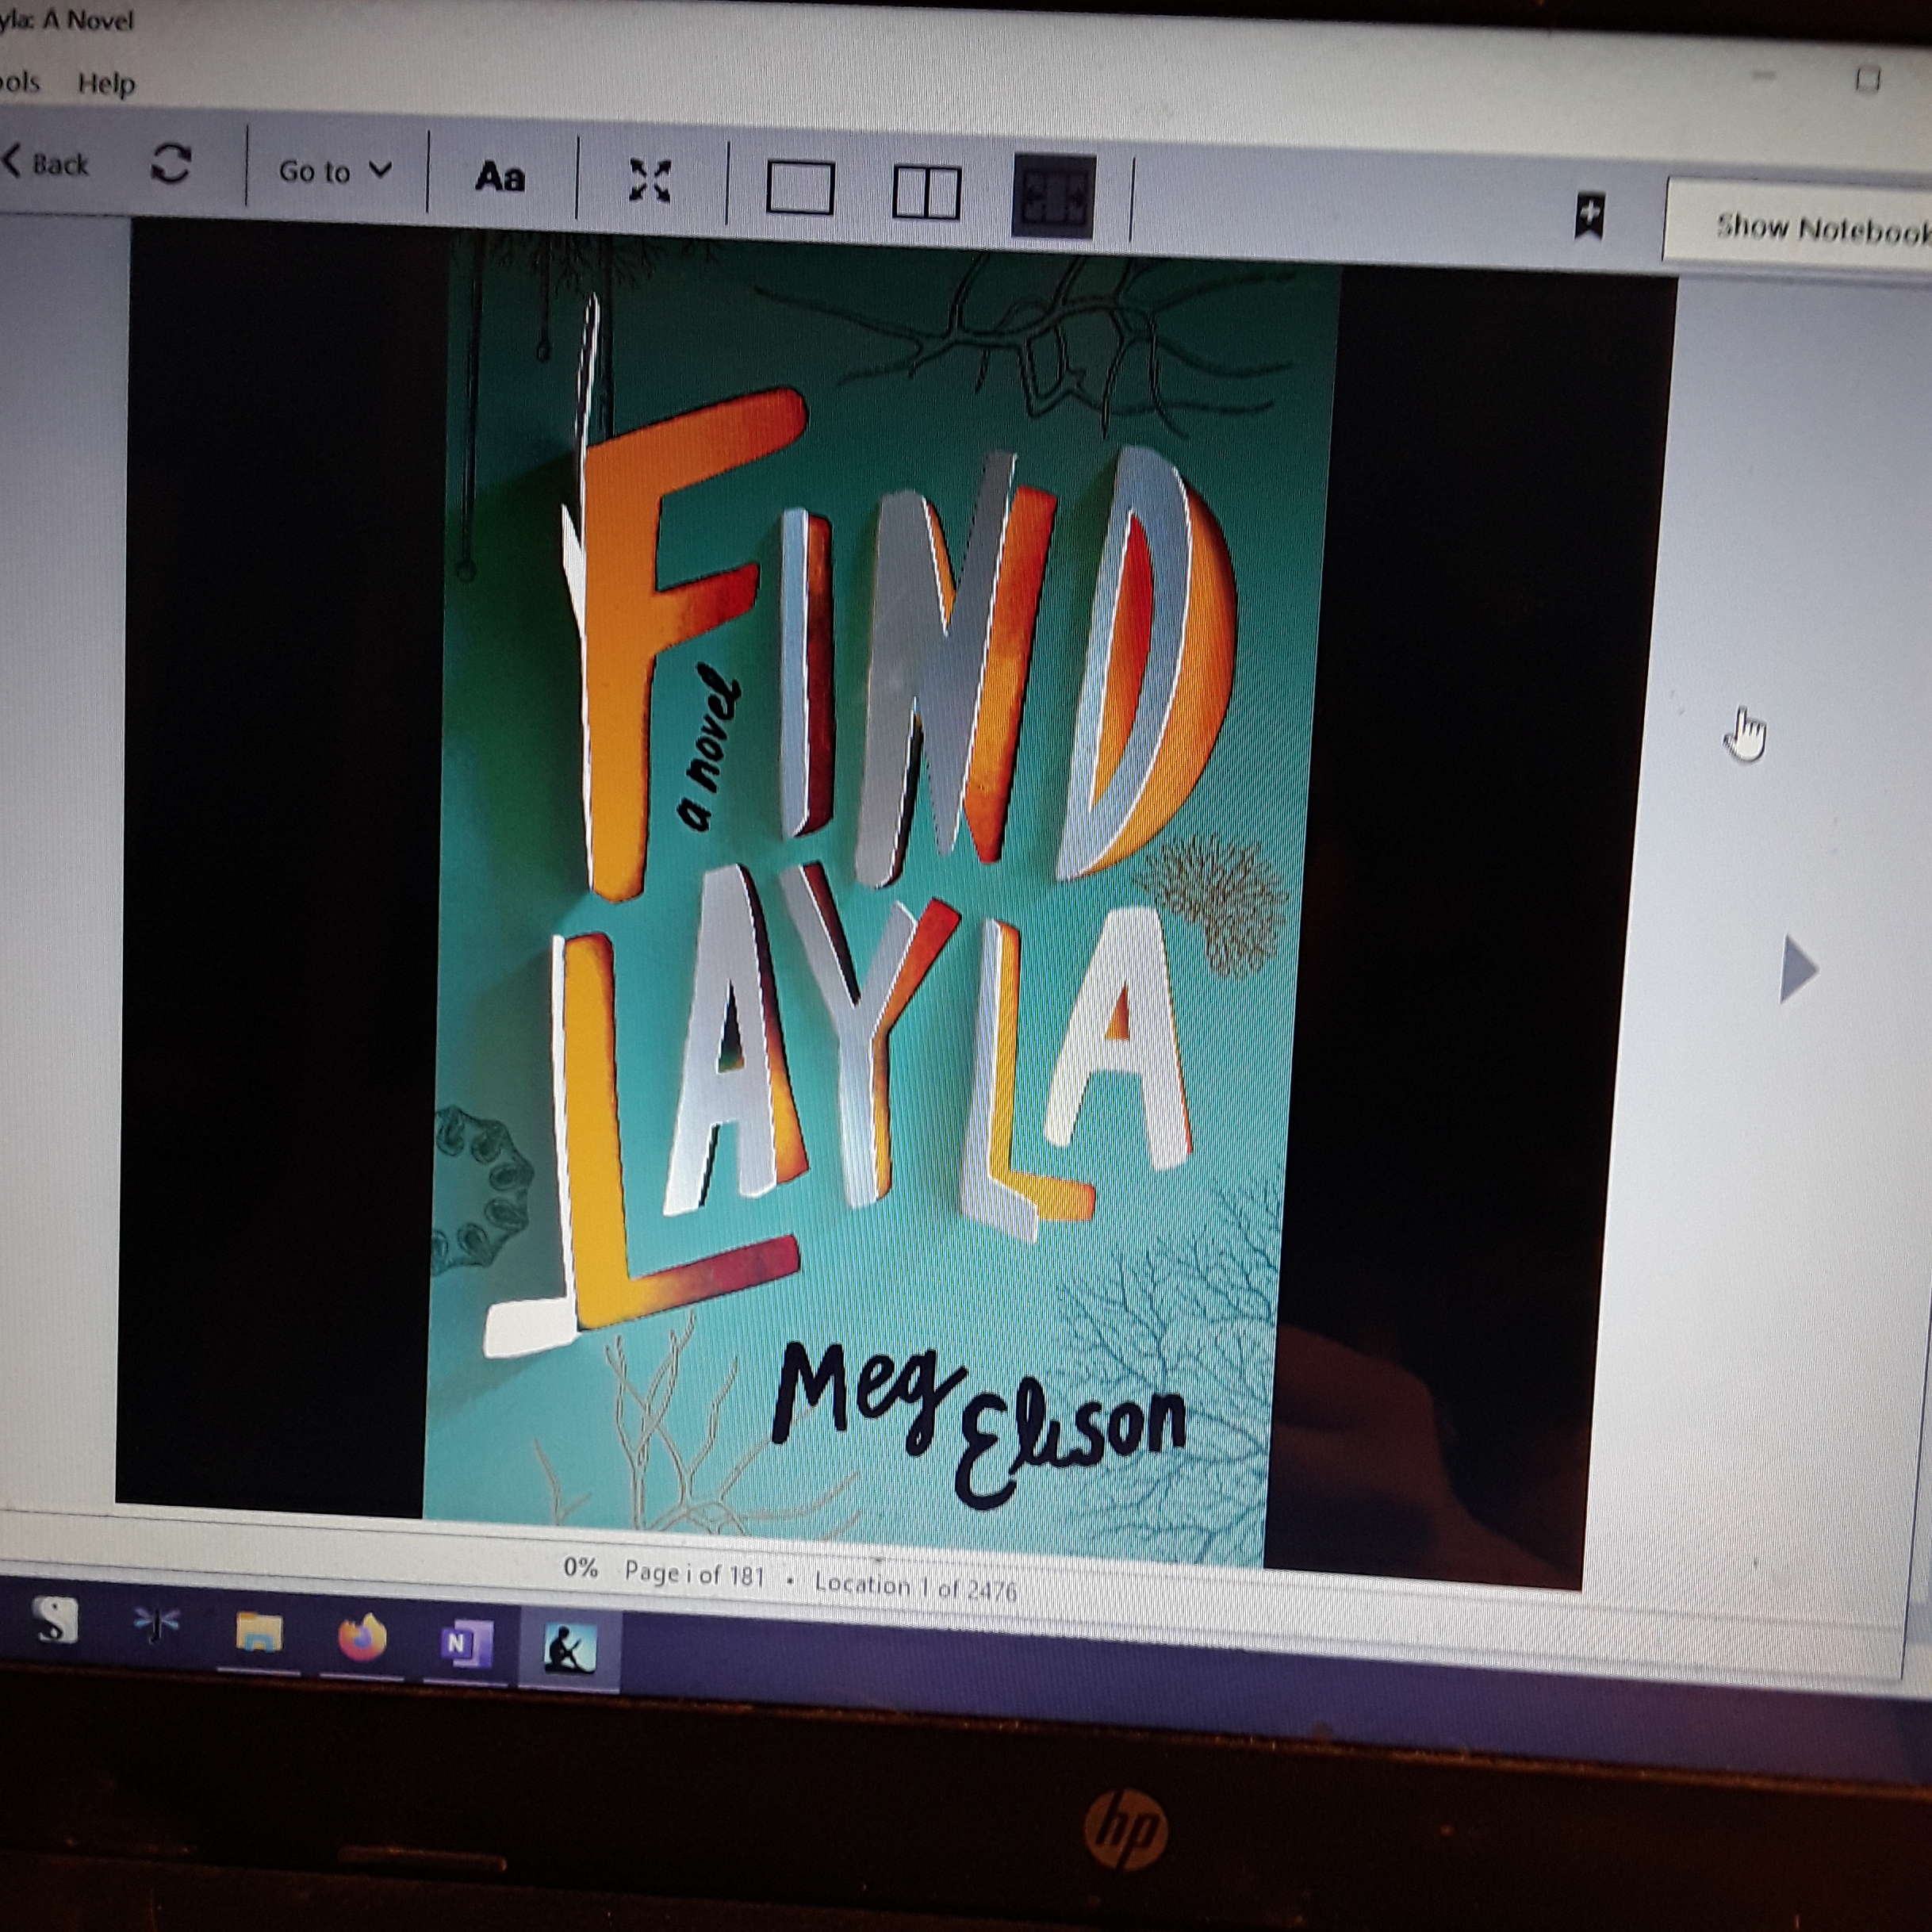 You are currently viewing Find Layla